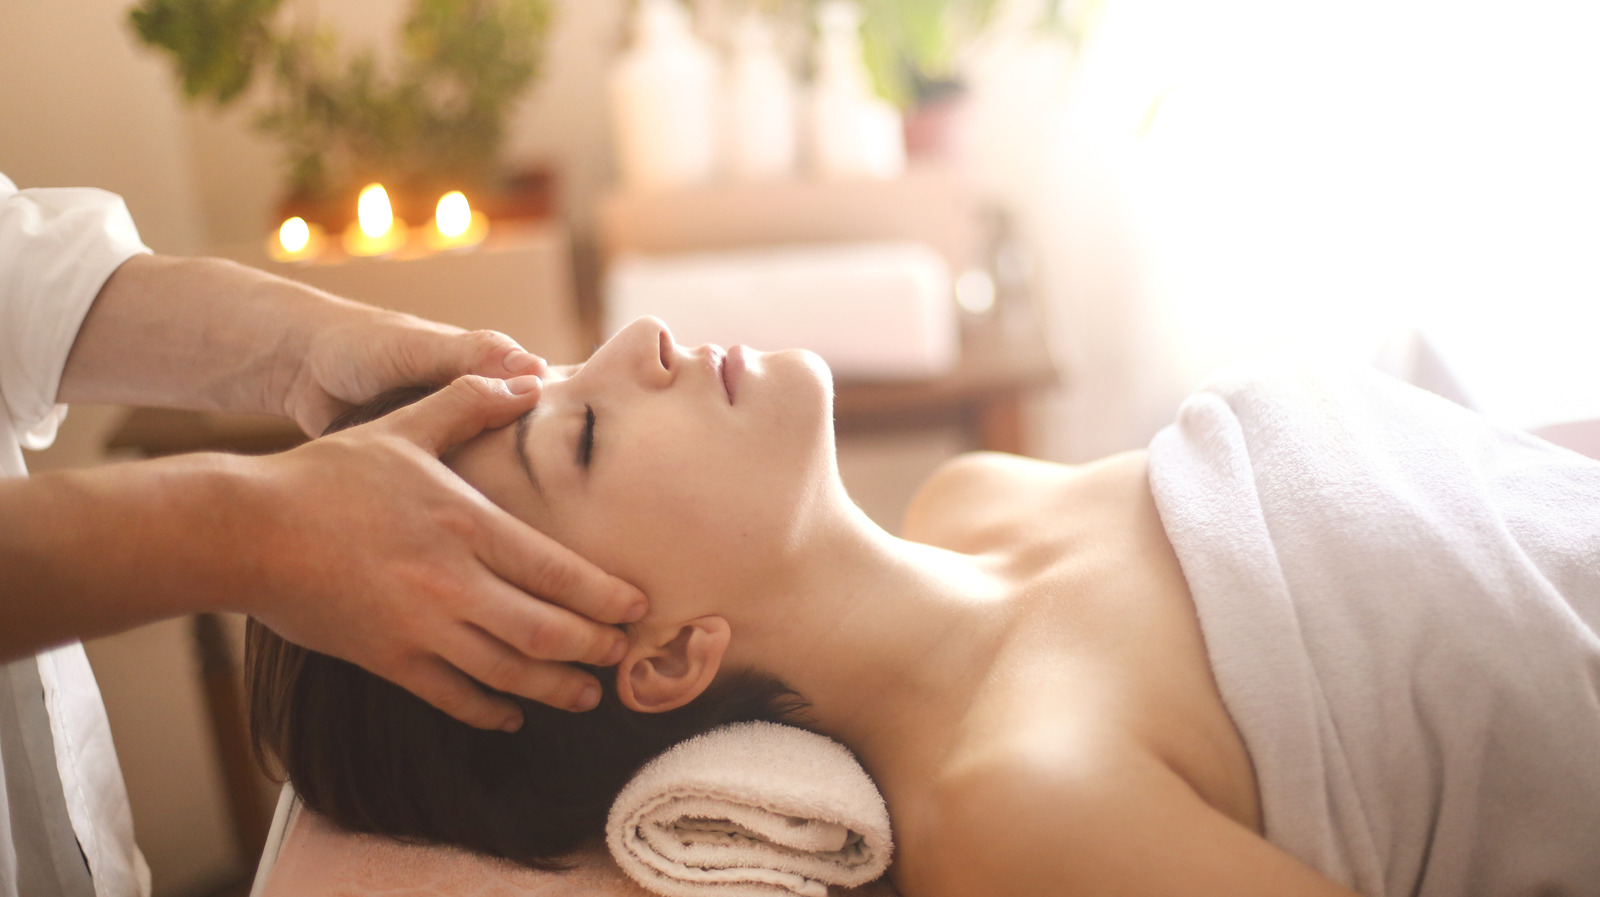 https://www.glam.com/img/gallery/our-best-tips-for-giving-the-ultimate-relaxing-head-massage/l-intro-1684084677.jpg